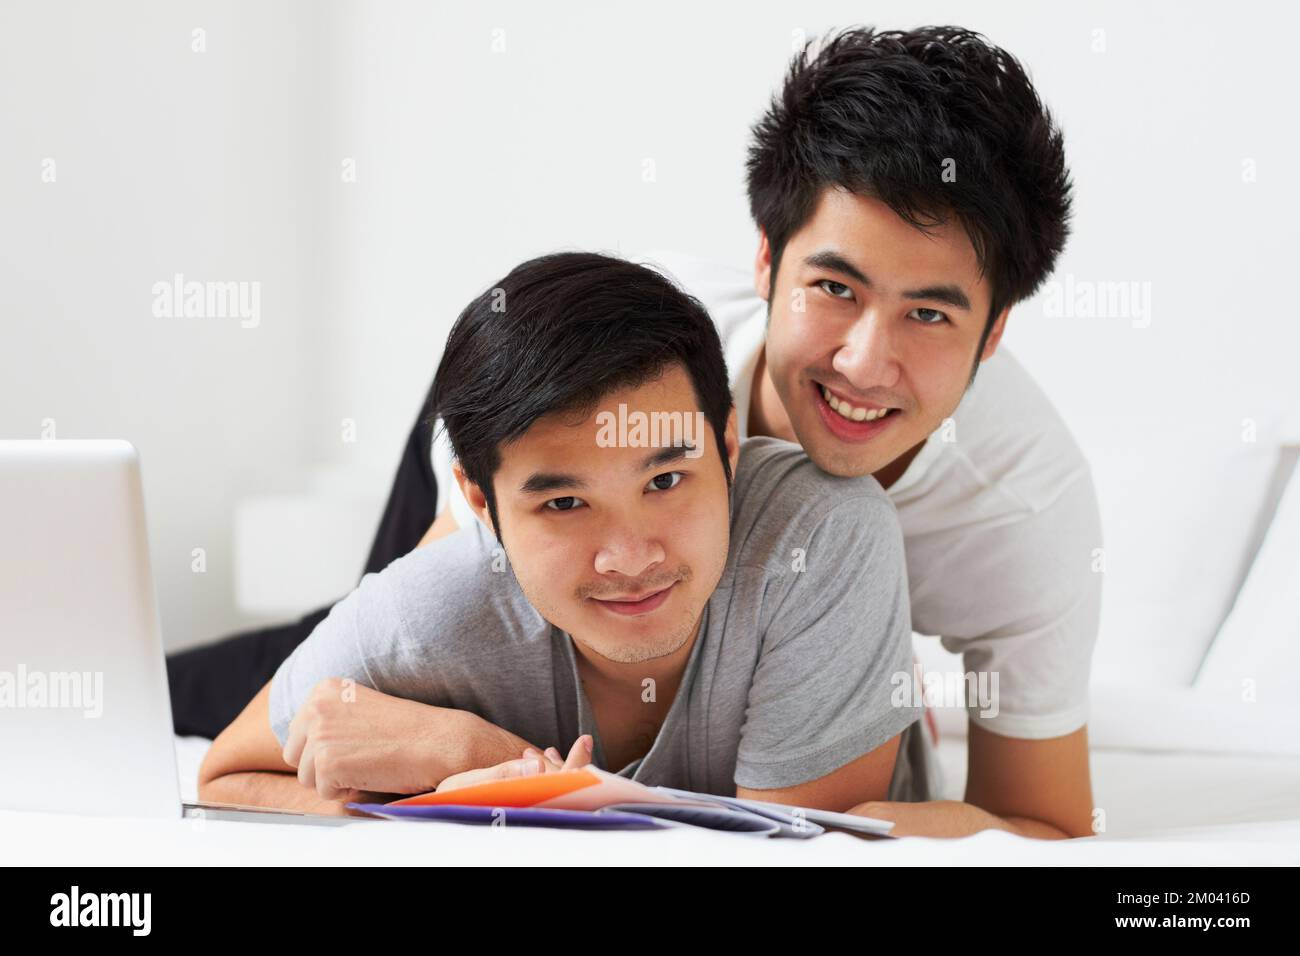 Spending the day together. Portrait of a young gay couple relaxing in bed. Stock Photo